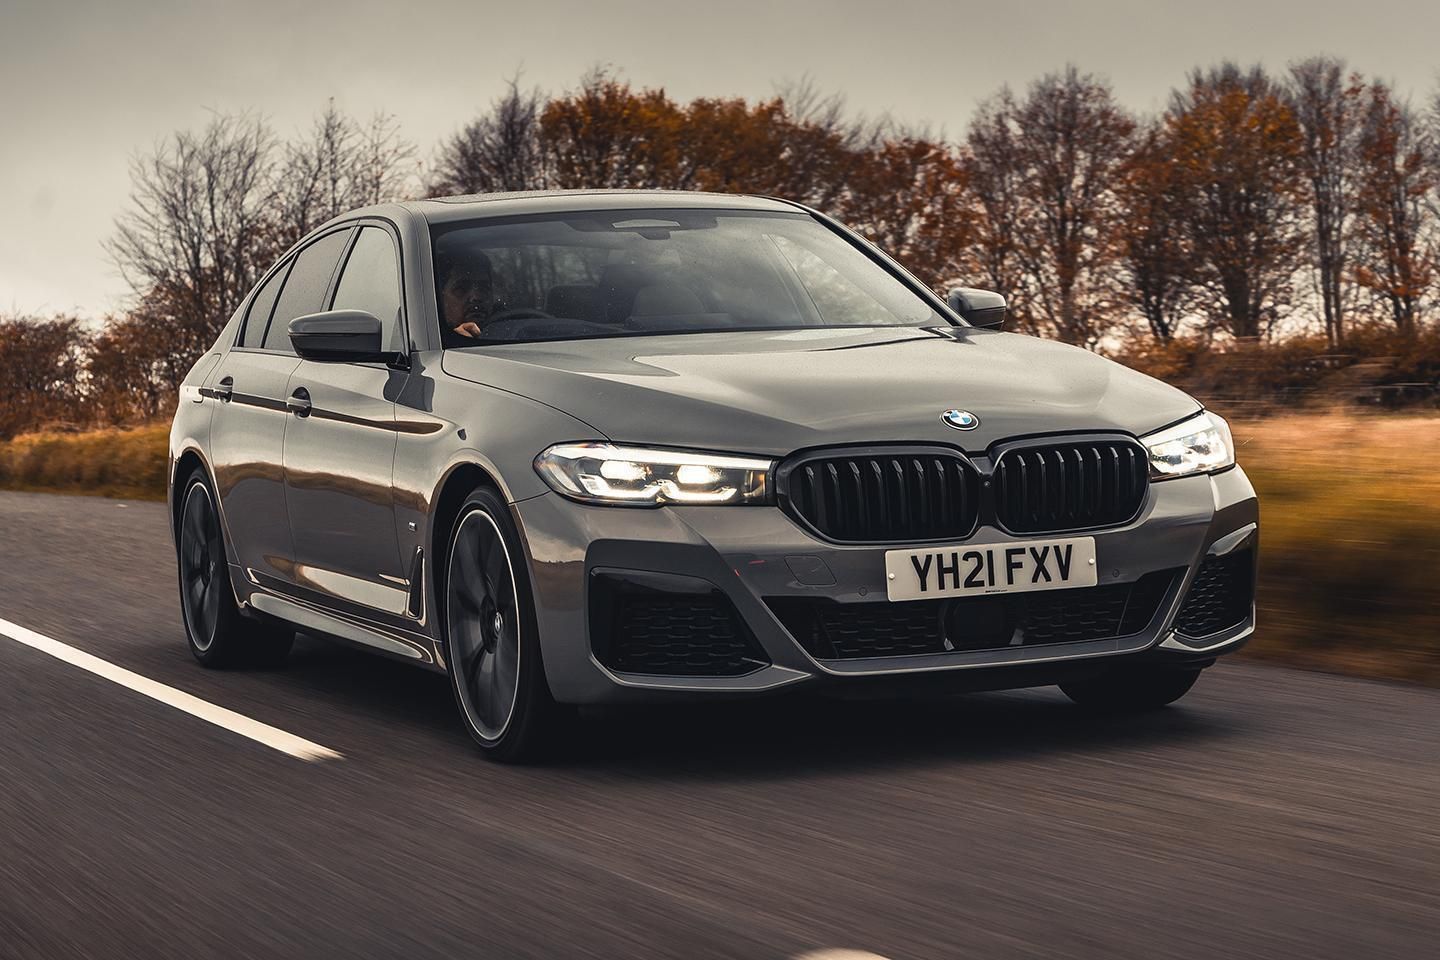 BMW 5 Series [G30] (2016 - 2020) used car review, Car review